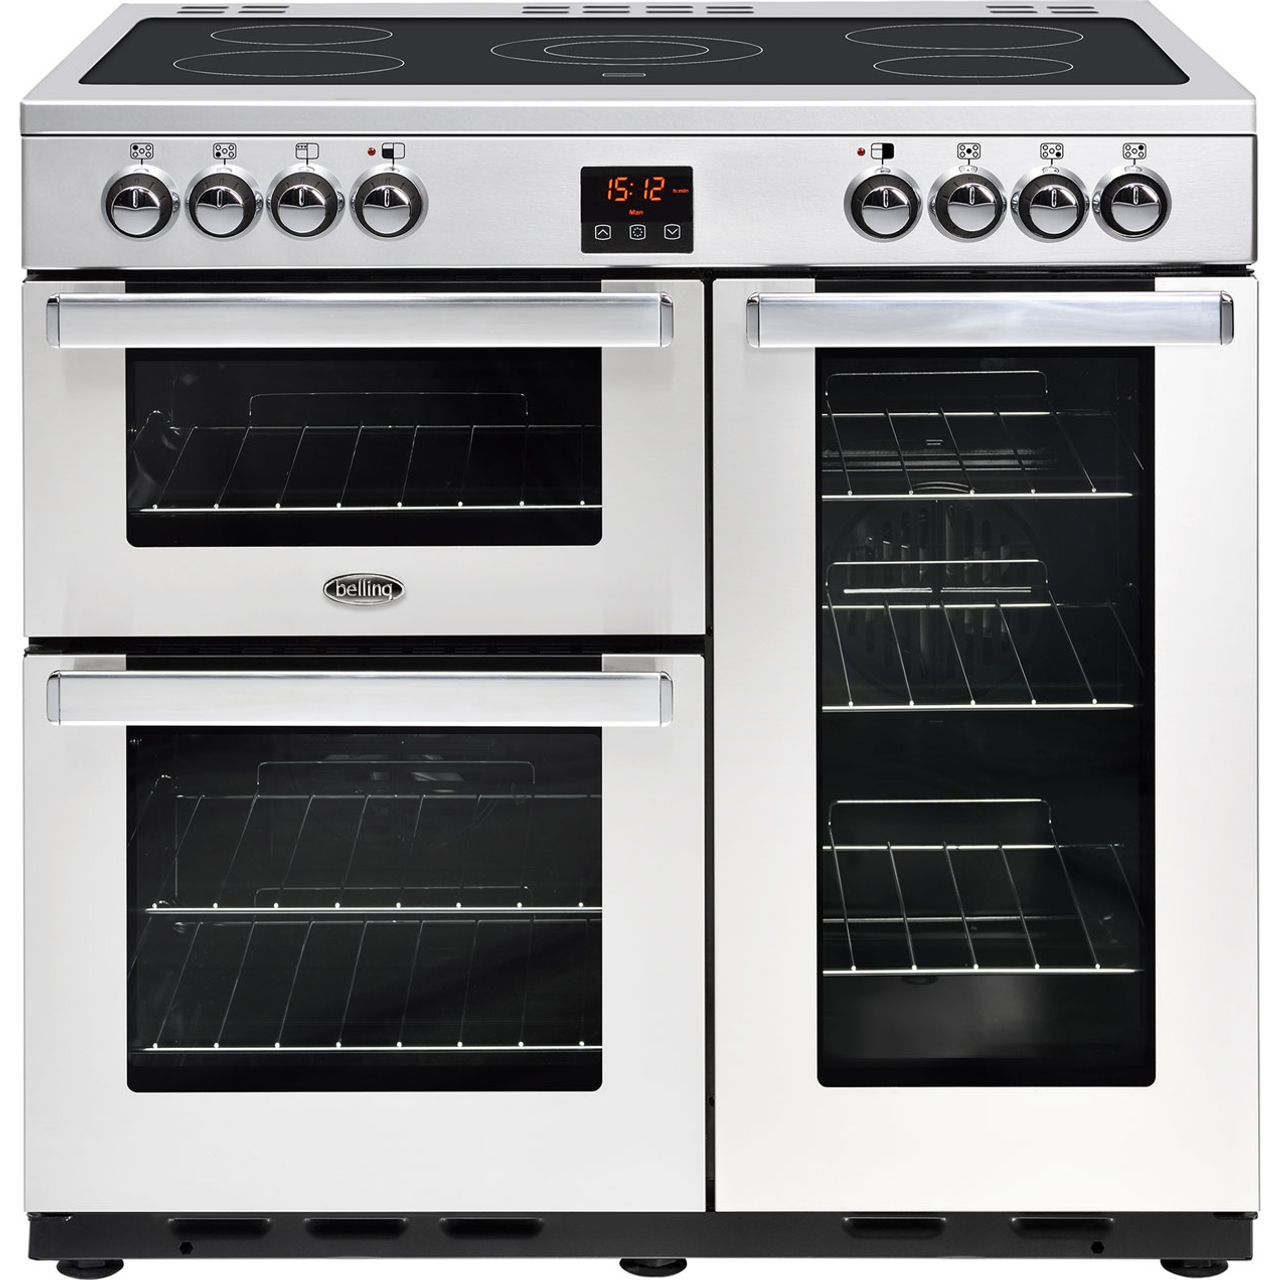 Belling Cookcentre90EProf 90cm Electric Range Cooker with Ceramic Hob Review